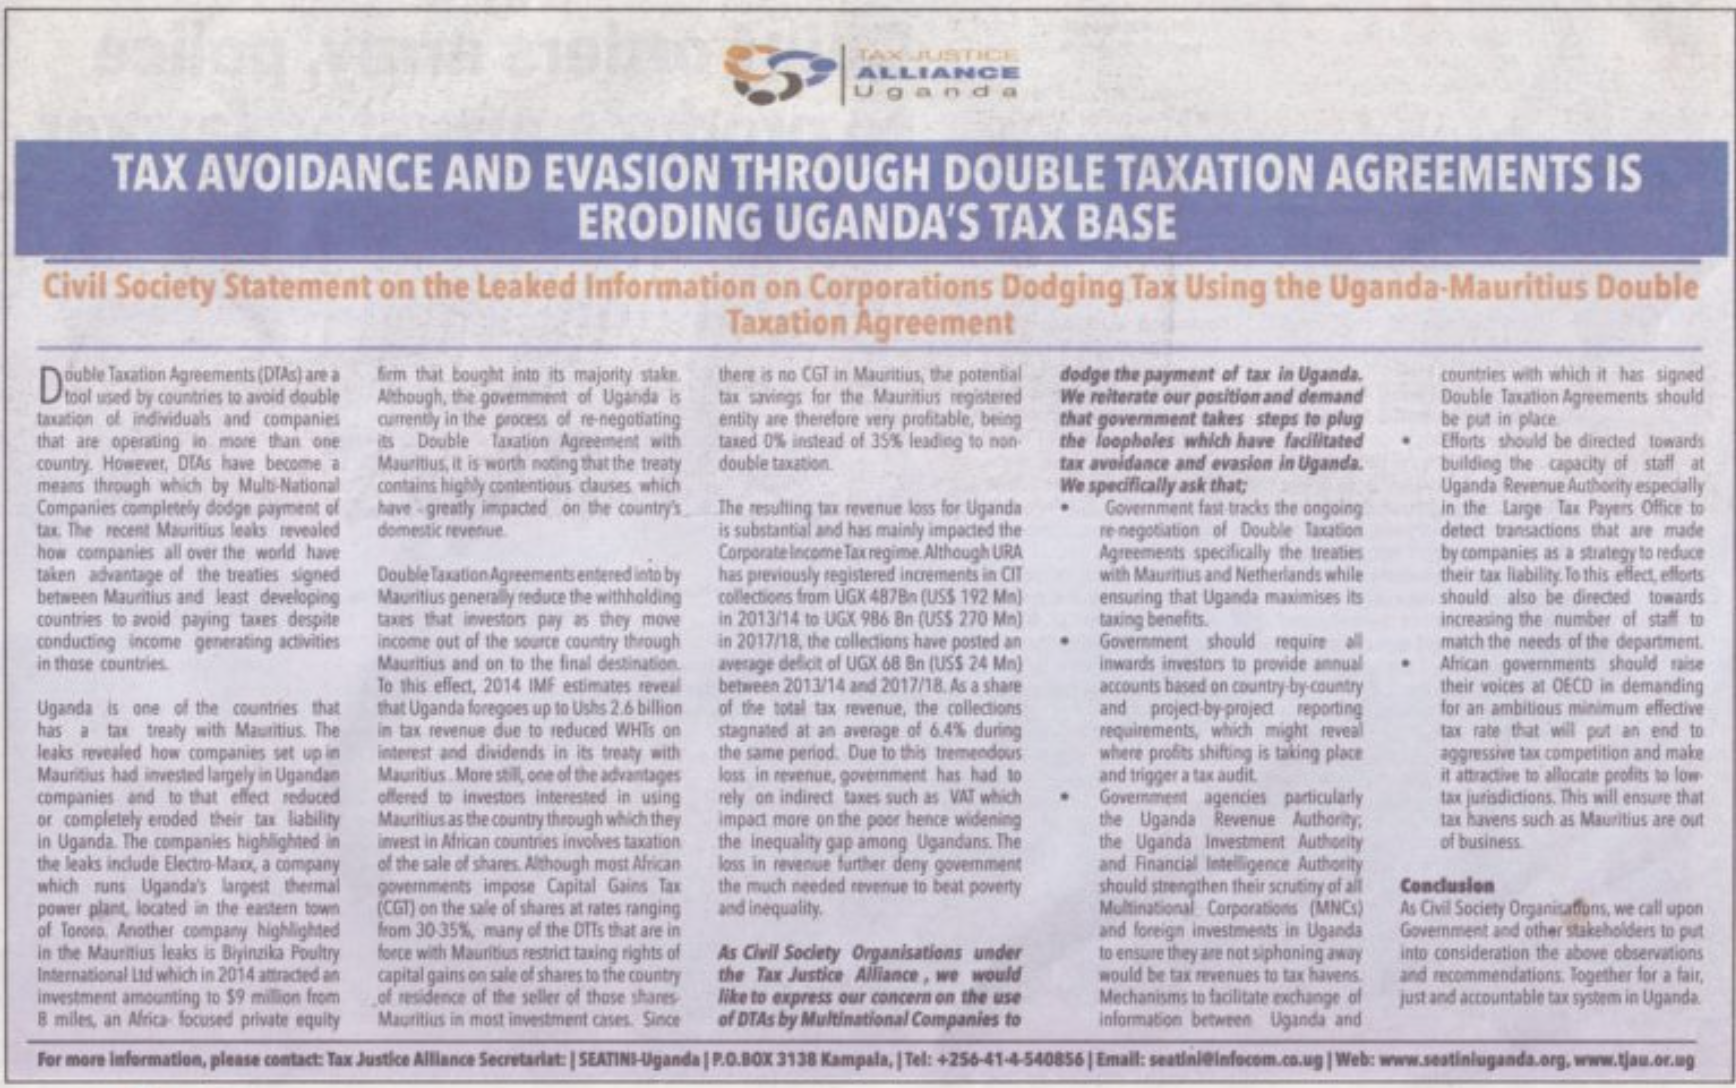 Tax avoidance and evasion through double taxation agreements is eroding Uganda’s tax base